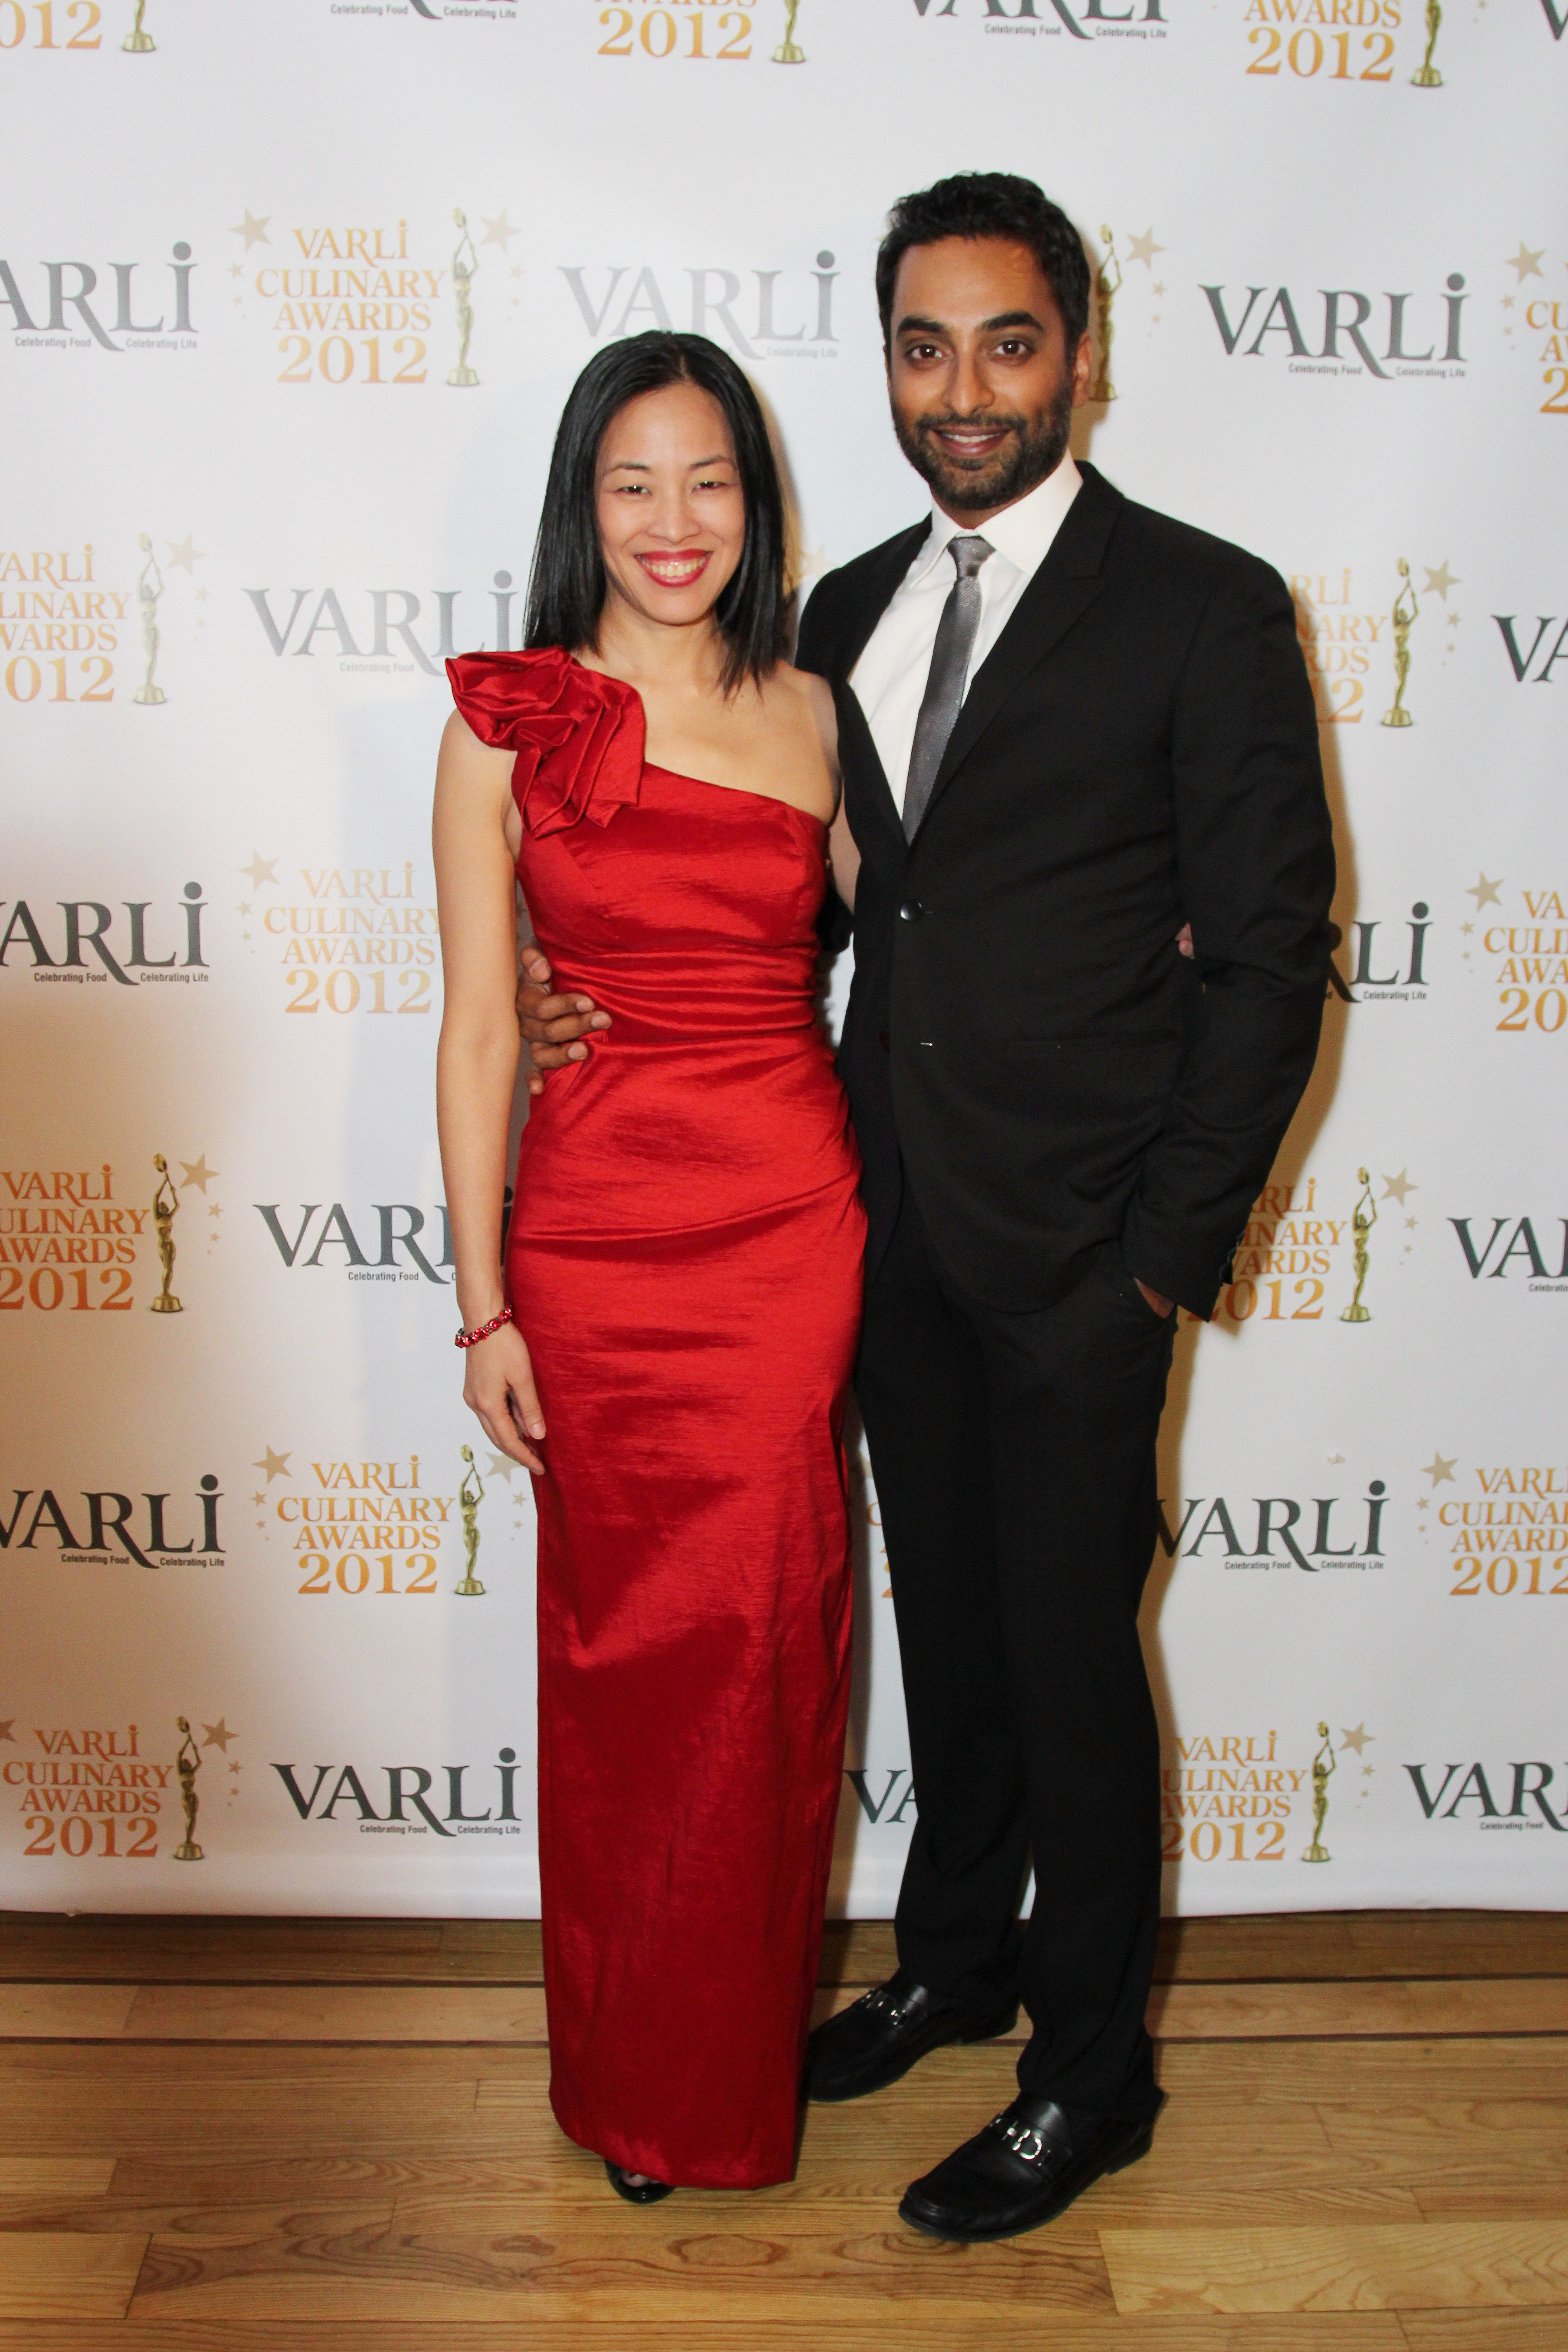 November 15, 2012: Actor Manu Narayan, co-host of the First Annual Varli Culinary Awards with actor/photographer Lia Chang, on the red carpet at The Altman Building in New York City.